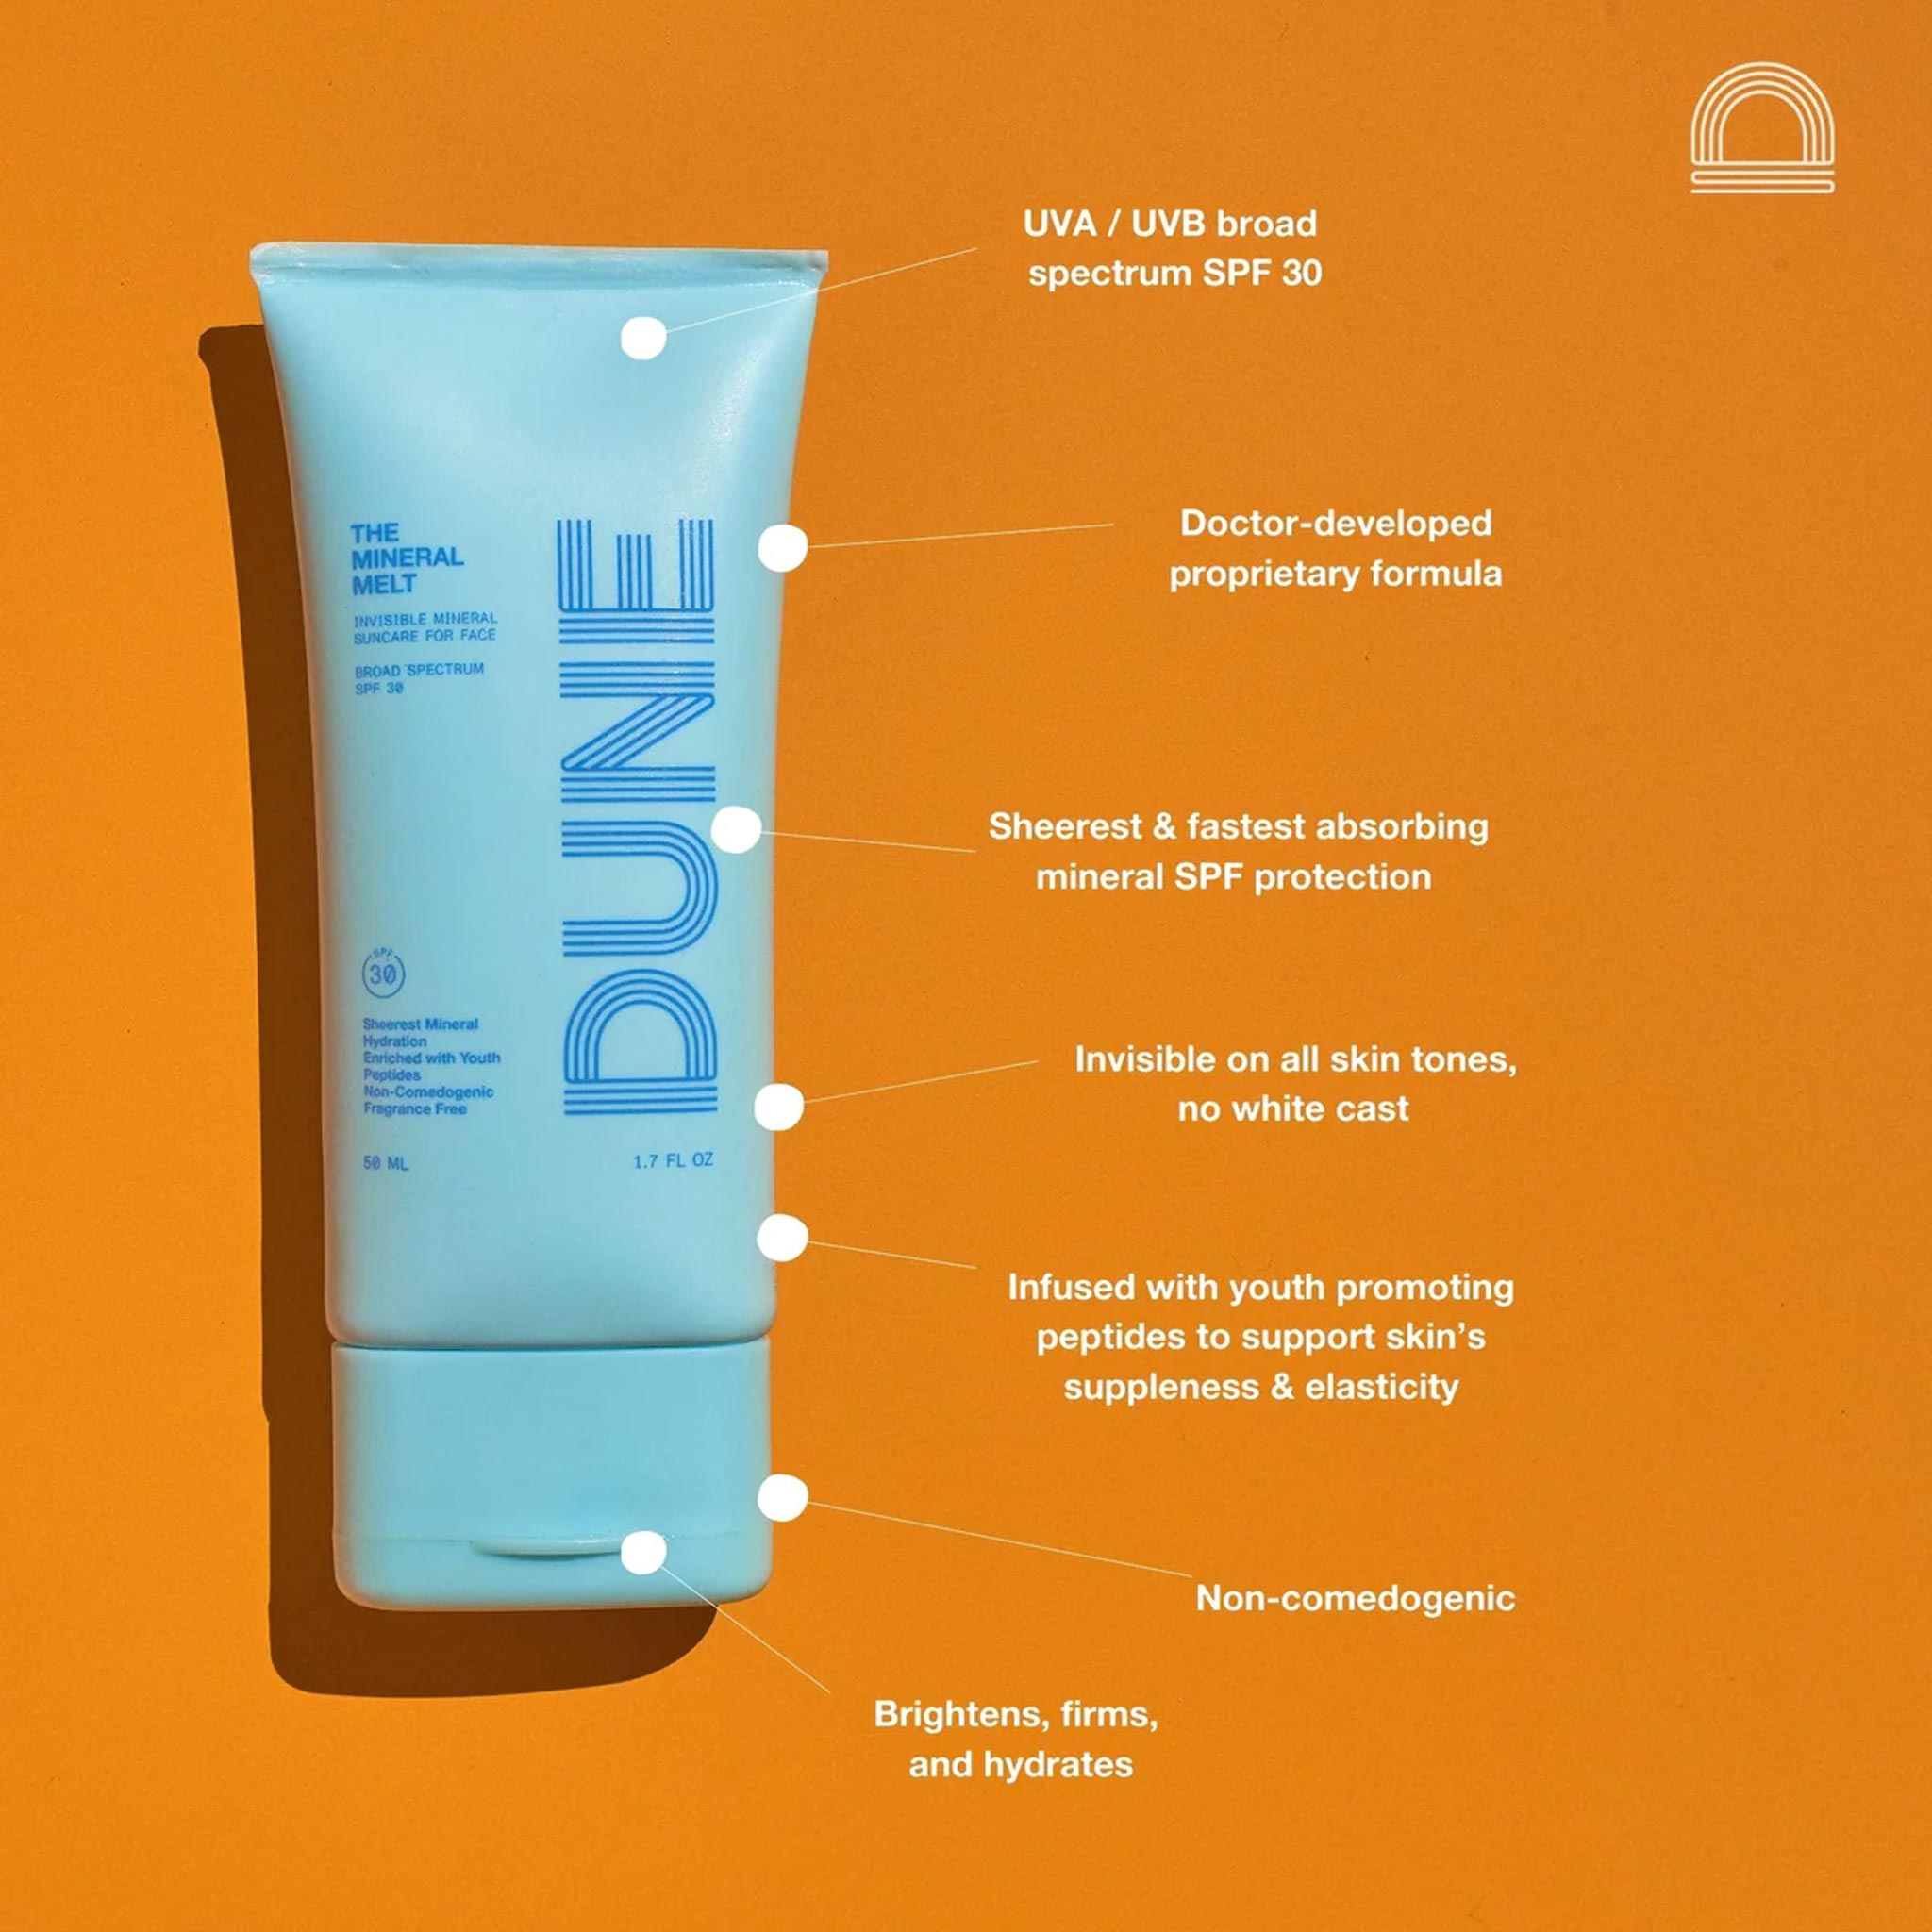 Mineral Melt sunscreen on an orange background with text showing various benefits of this UVA/UVB broad spectrum SPF.